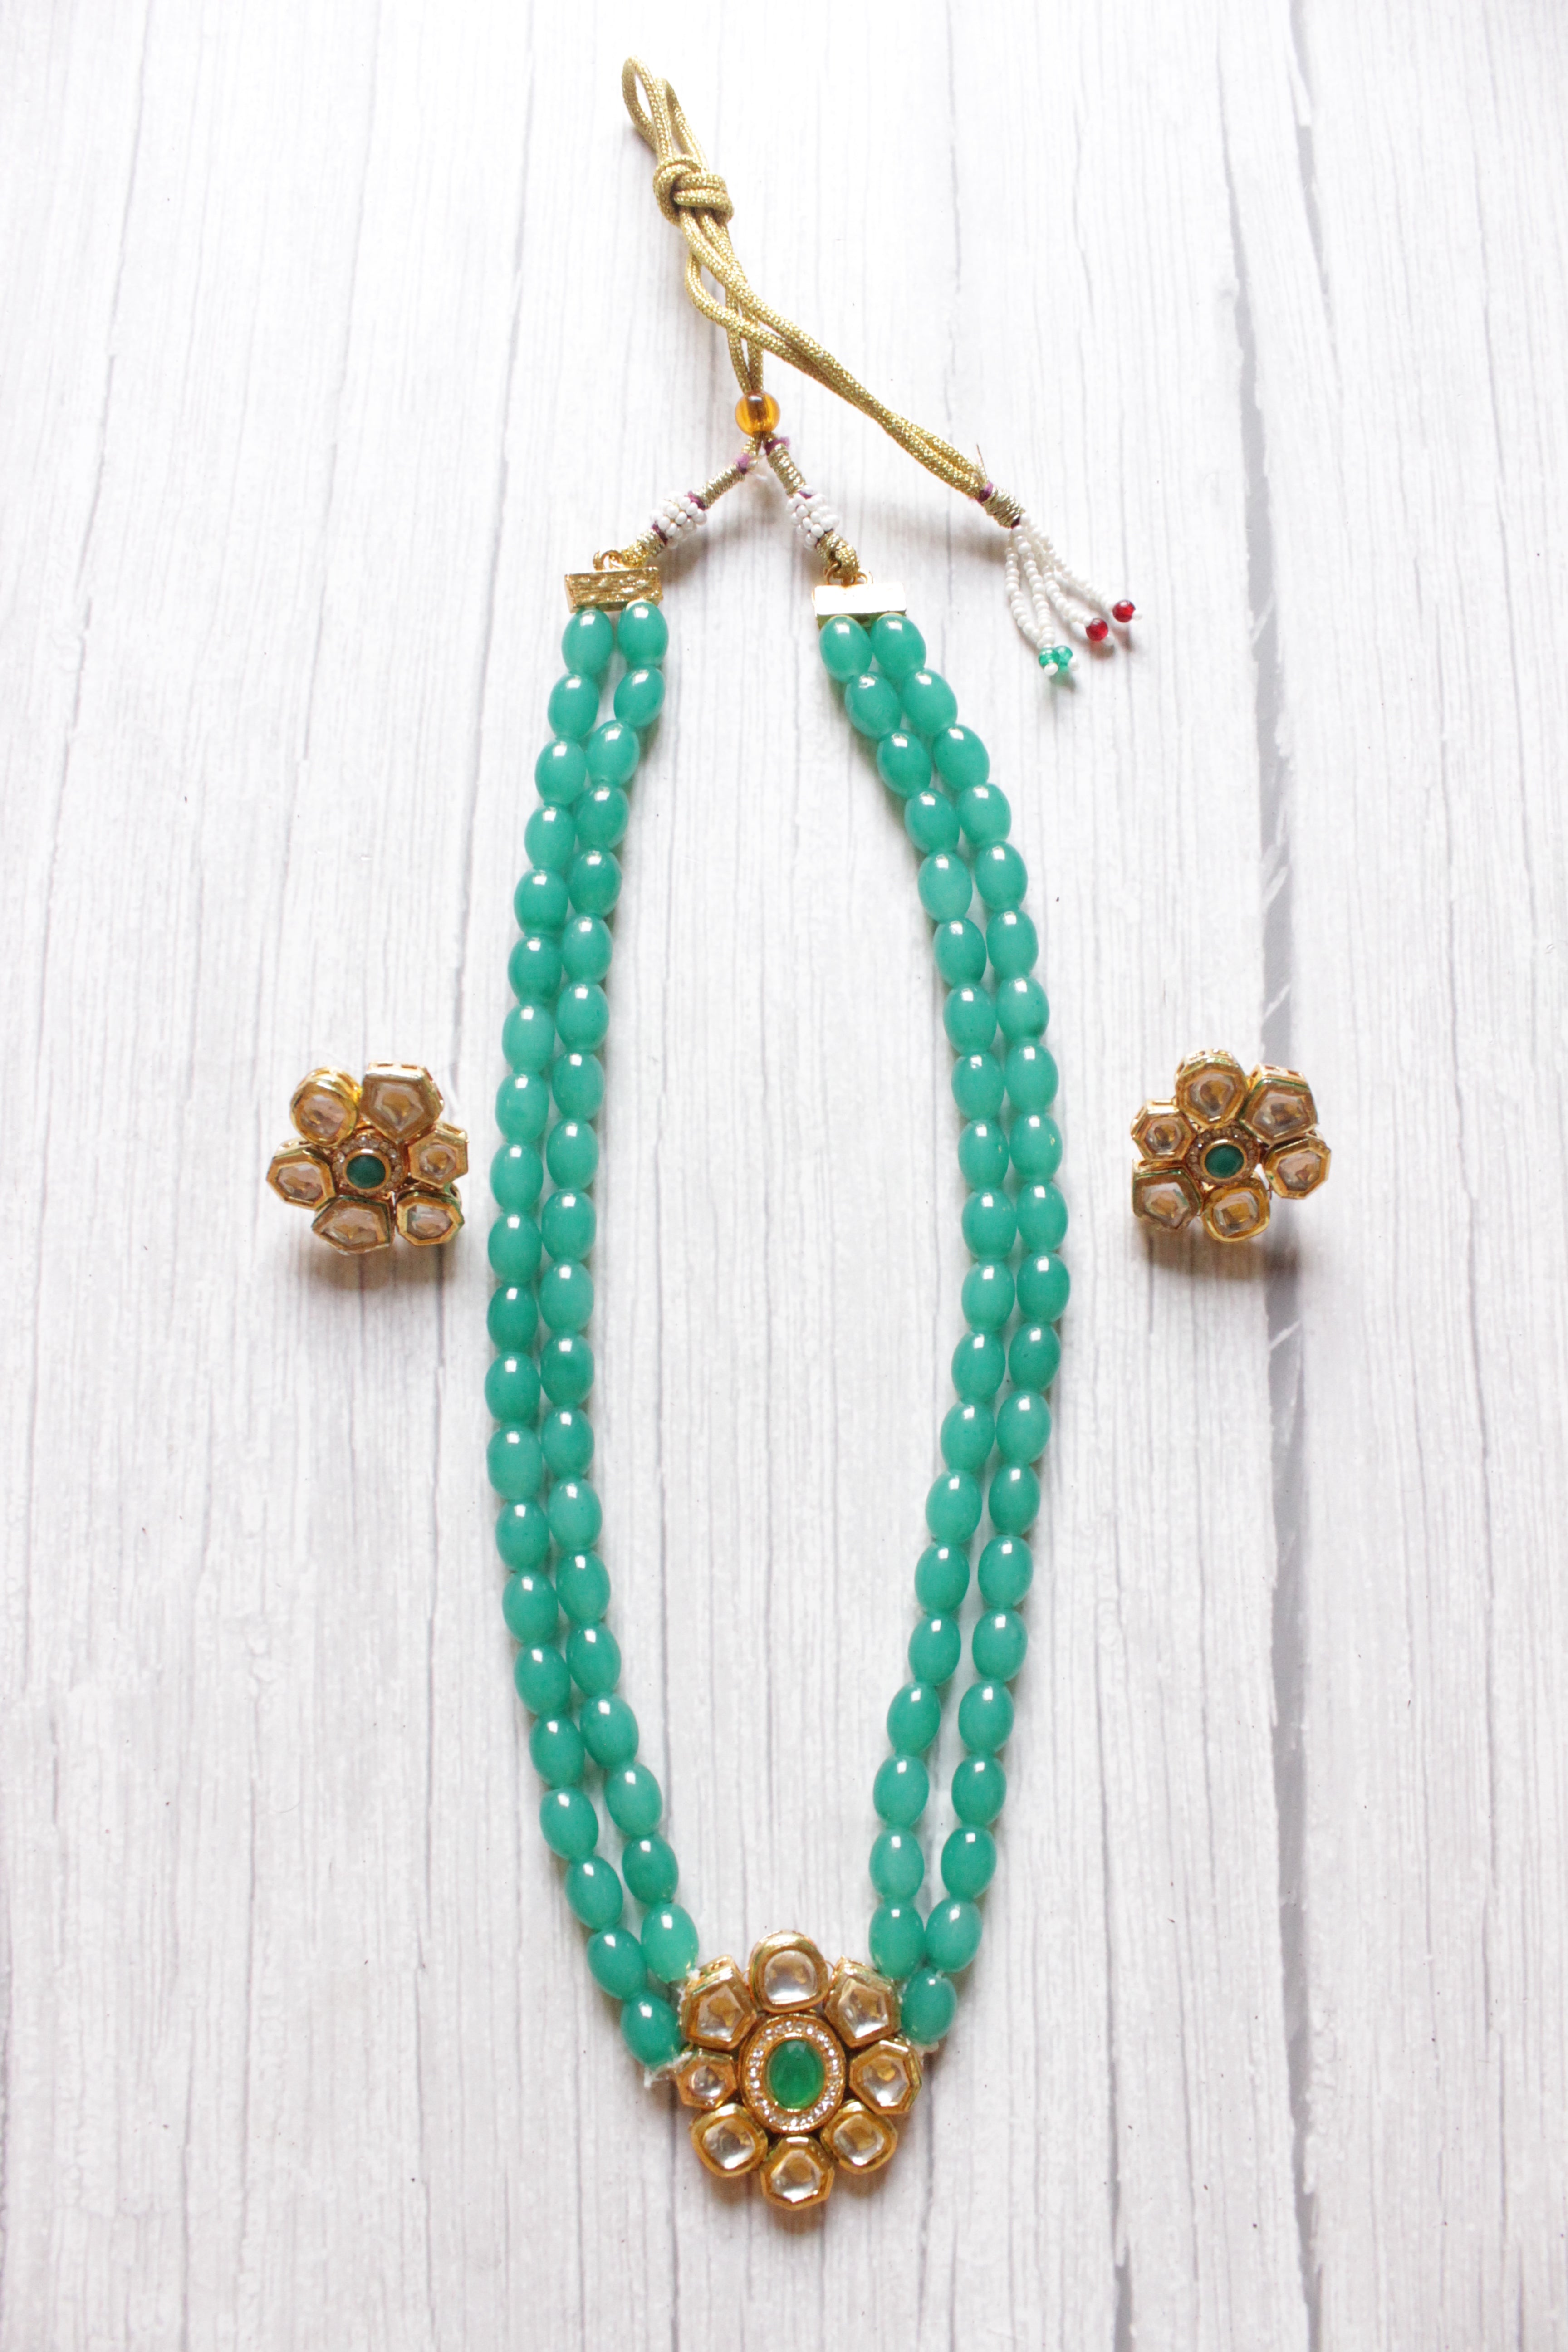 Turquoise Glass Beads and Kundan Stones 2 Layer Adjustable Length Necklace Set with Flower Stud Earrings